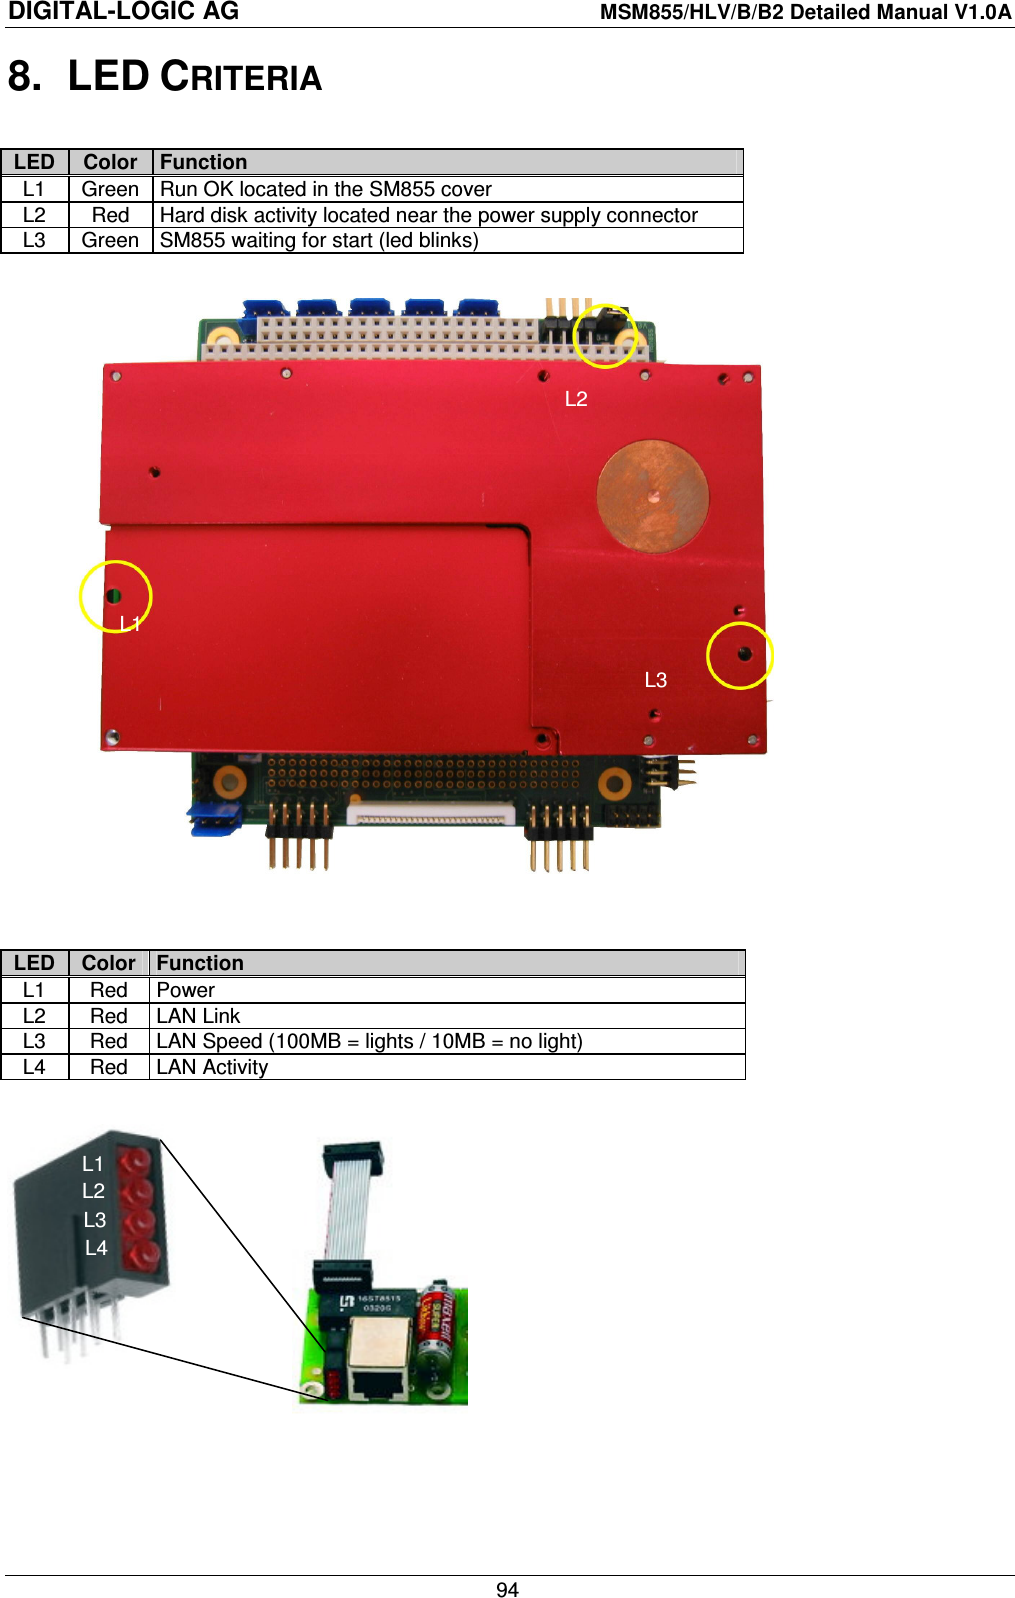 DIGITAL-LOGIC AG    MSM855/HLV/B/B2 Detailed Manual V1.0A    94 8.  LED CRITERIA  LED  Color  Function L1  Green  Run OK located in the SM855 cover L2  Red  Hard disk activity located near the power supply connector L3  Green  SM855 waiting for start (led blinks)    LED  Color  Function L1  Red  Power L2  Red  LAN Link L3  Red  LAN Speed (100MB = lights / 10MB = no light) L4  Red  LAN Activity     L1 L2 L3 L1 L2 L3 L4 